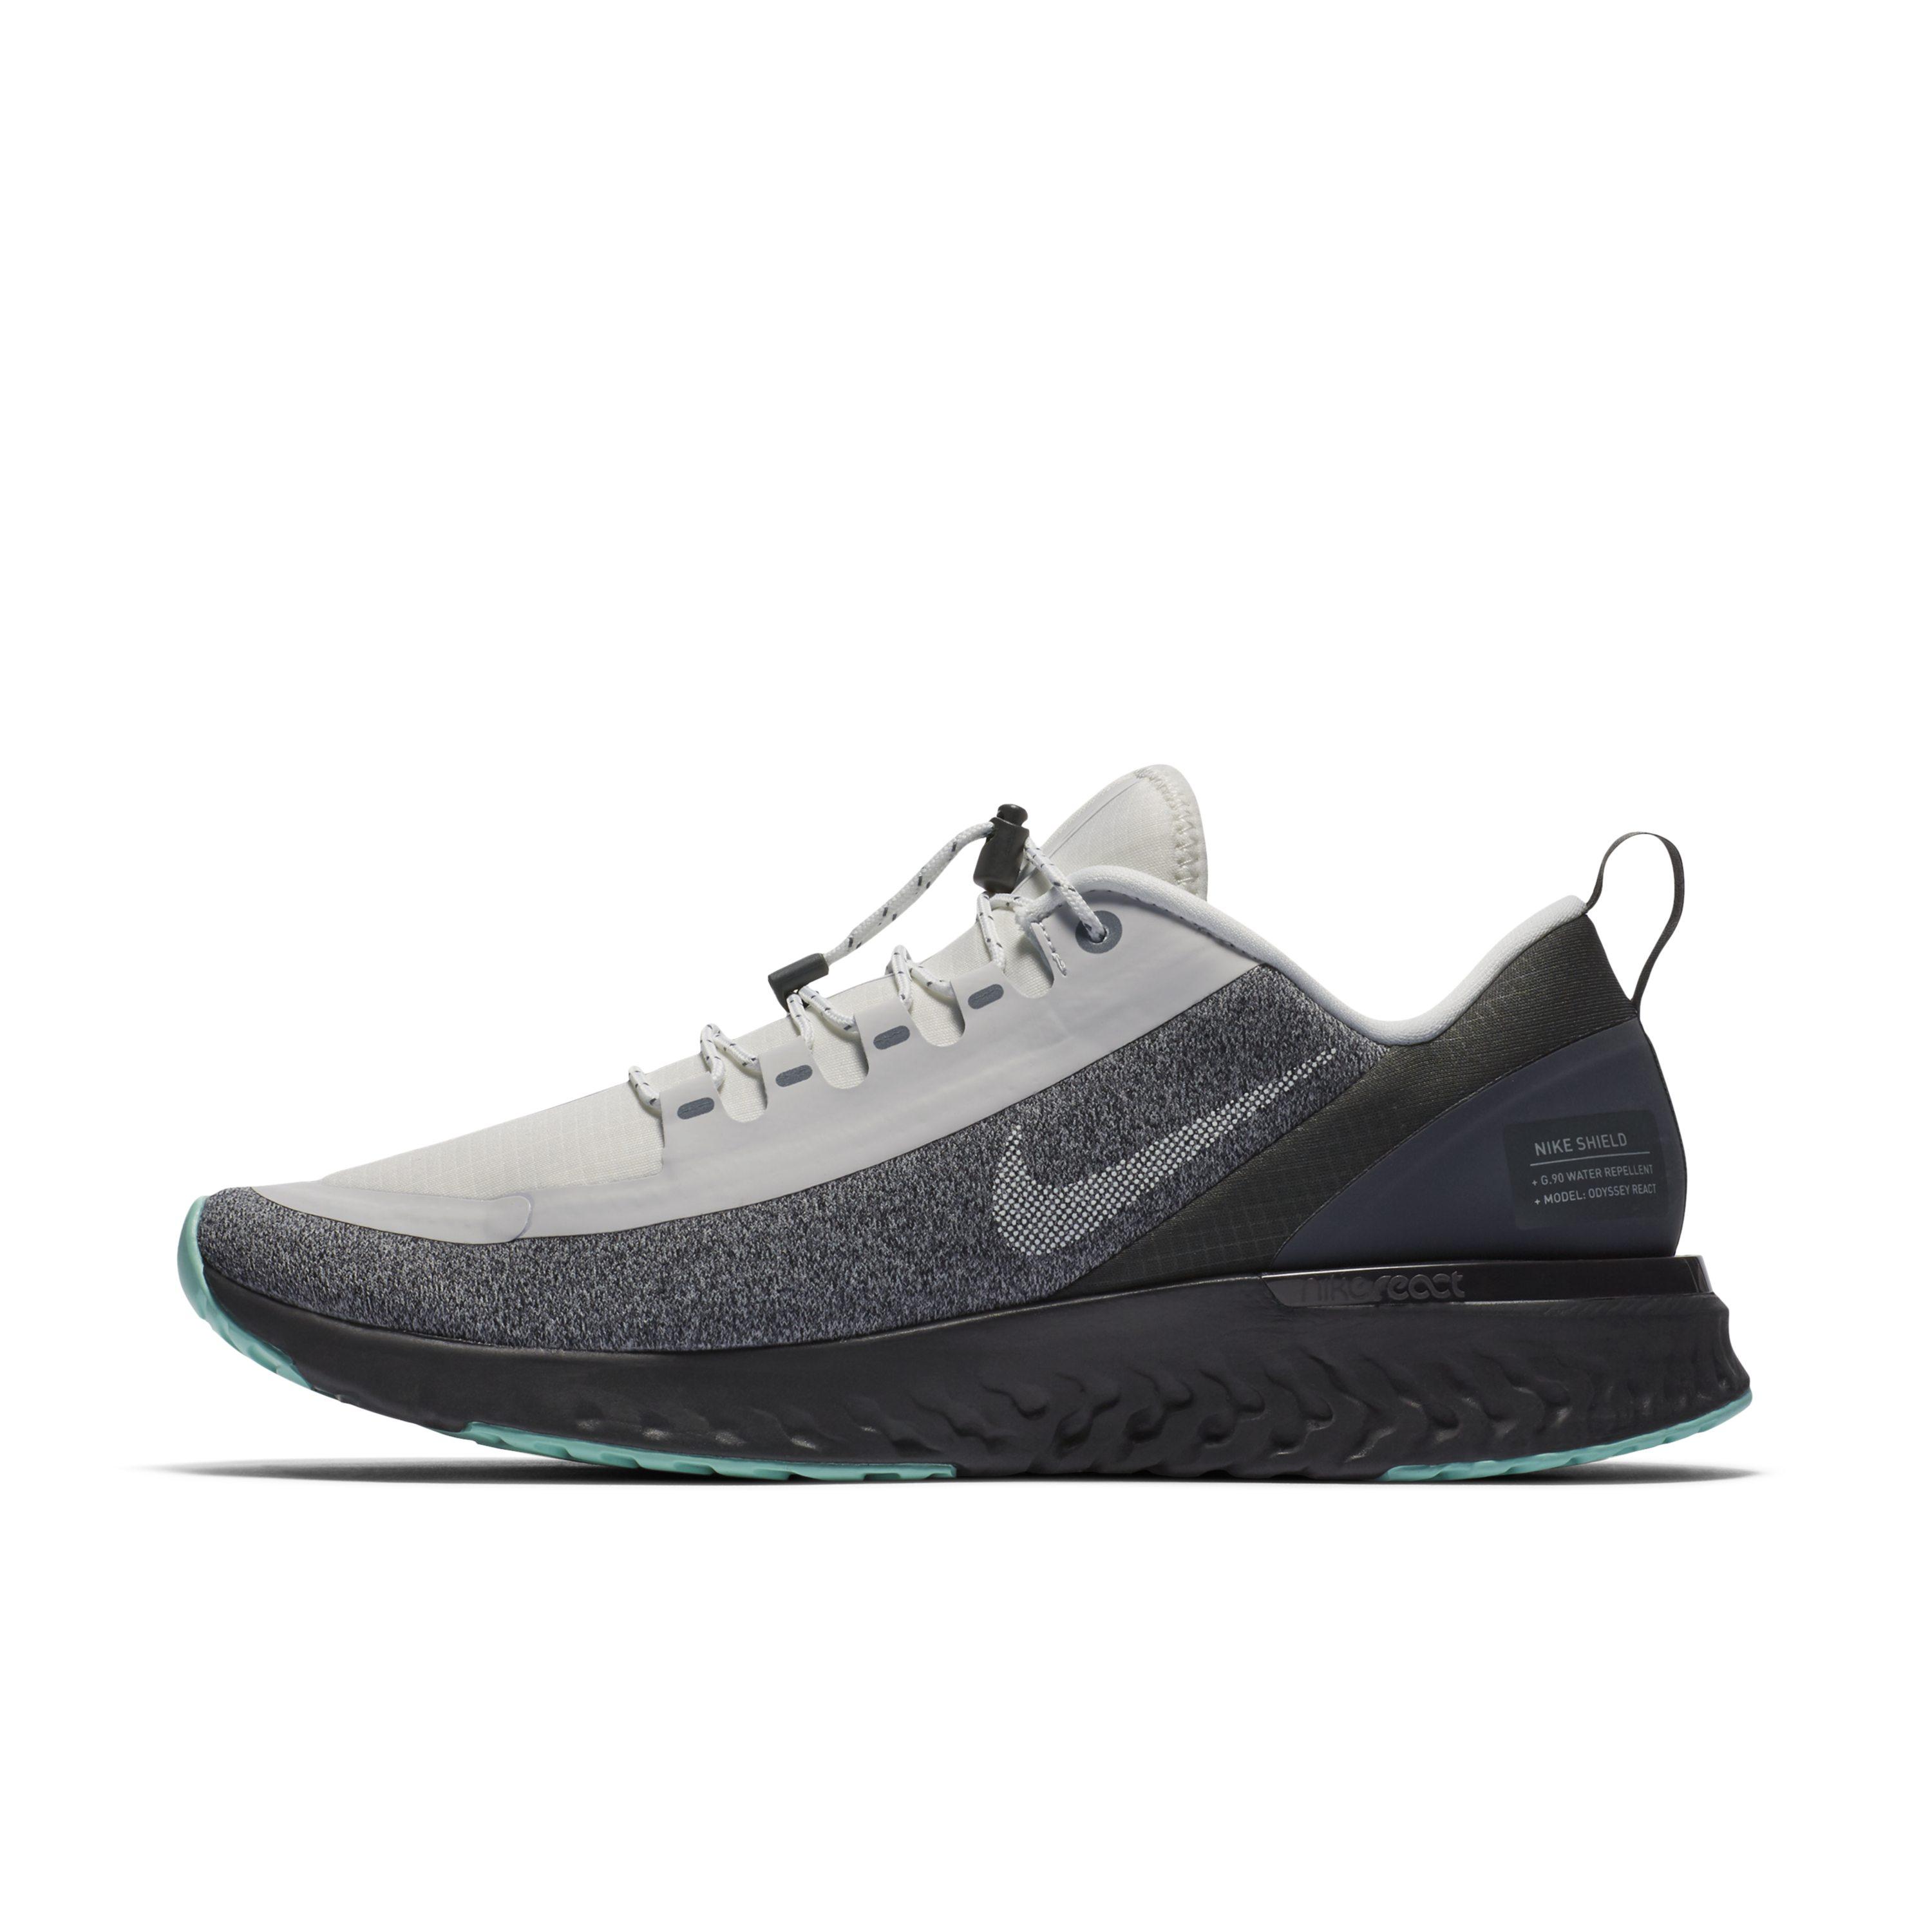 nike water resistant shoes Online Shopping mall | Find the best prices and  places to buy -